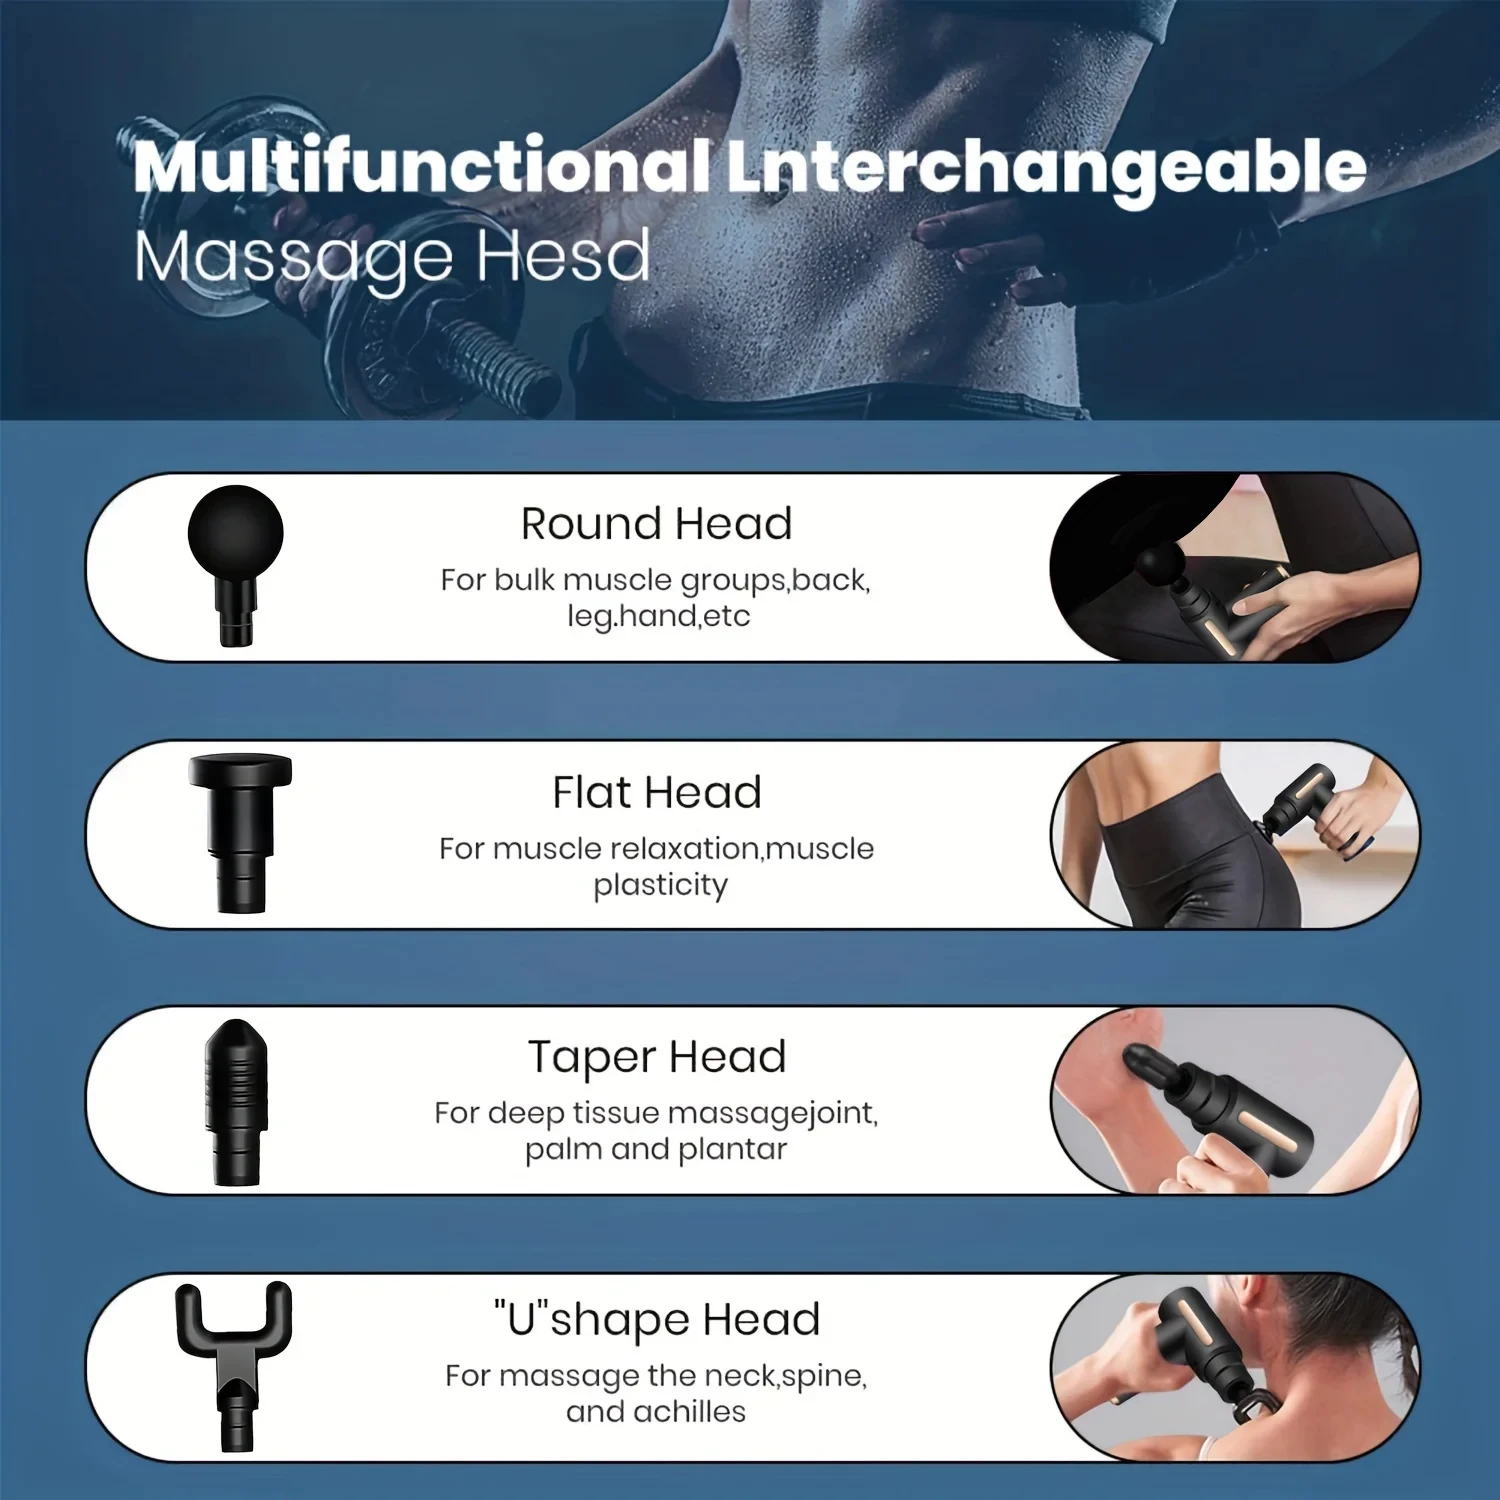 Portable Fascial Massage Gun Electric Percussion Pistol Massager Body Relaxation With LED Touch Screen 4Replaceable Massage Head images - 6